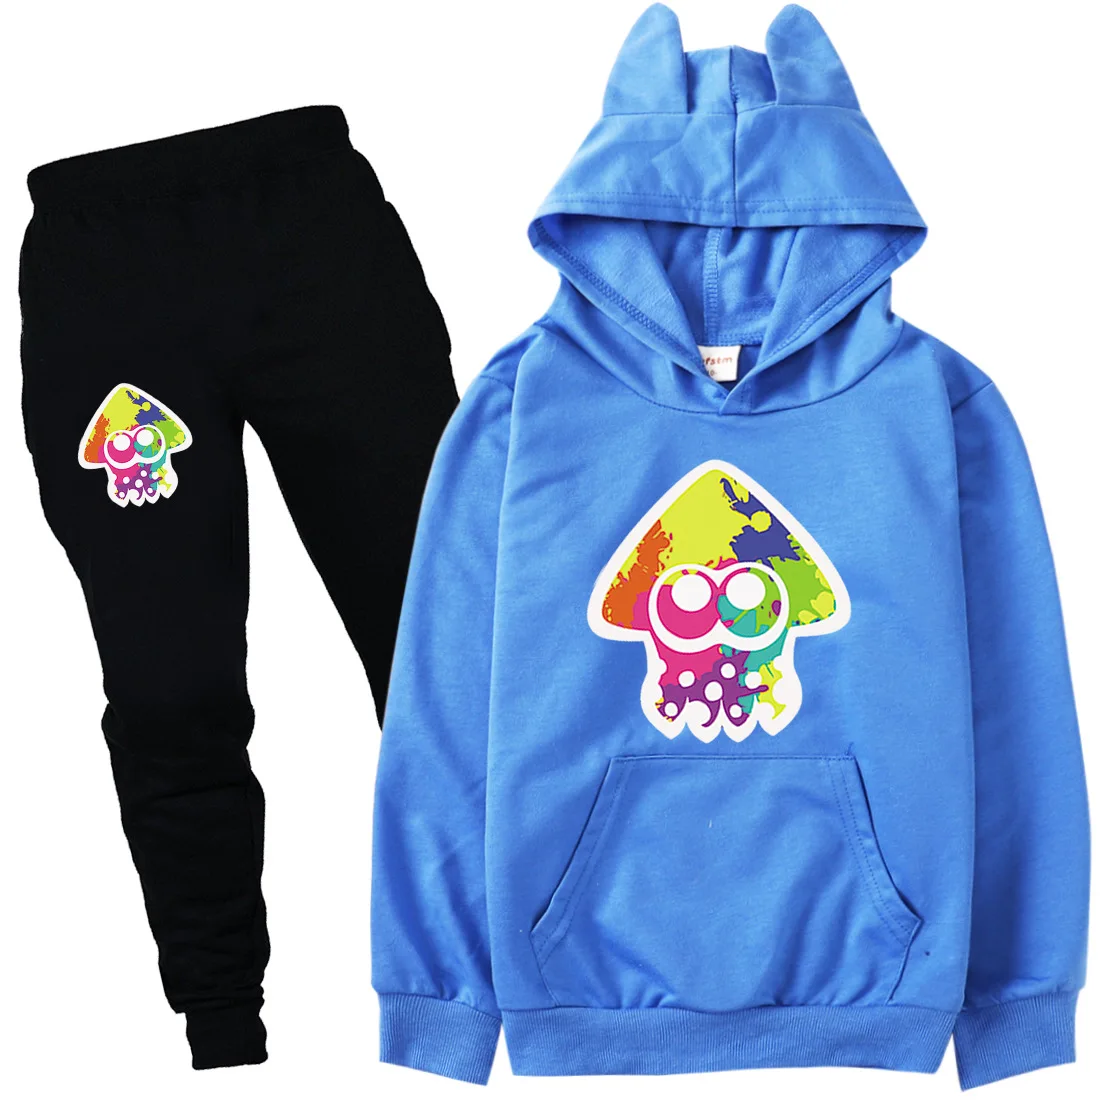 

Splatoon 3 Game Kids Sportsuit Toddler Boys Outfits Baby Girls Fashion Hoodie Sweater+pants 2pcs Suit Children's Clothing Sets